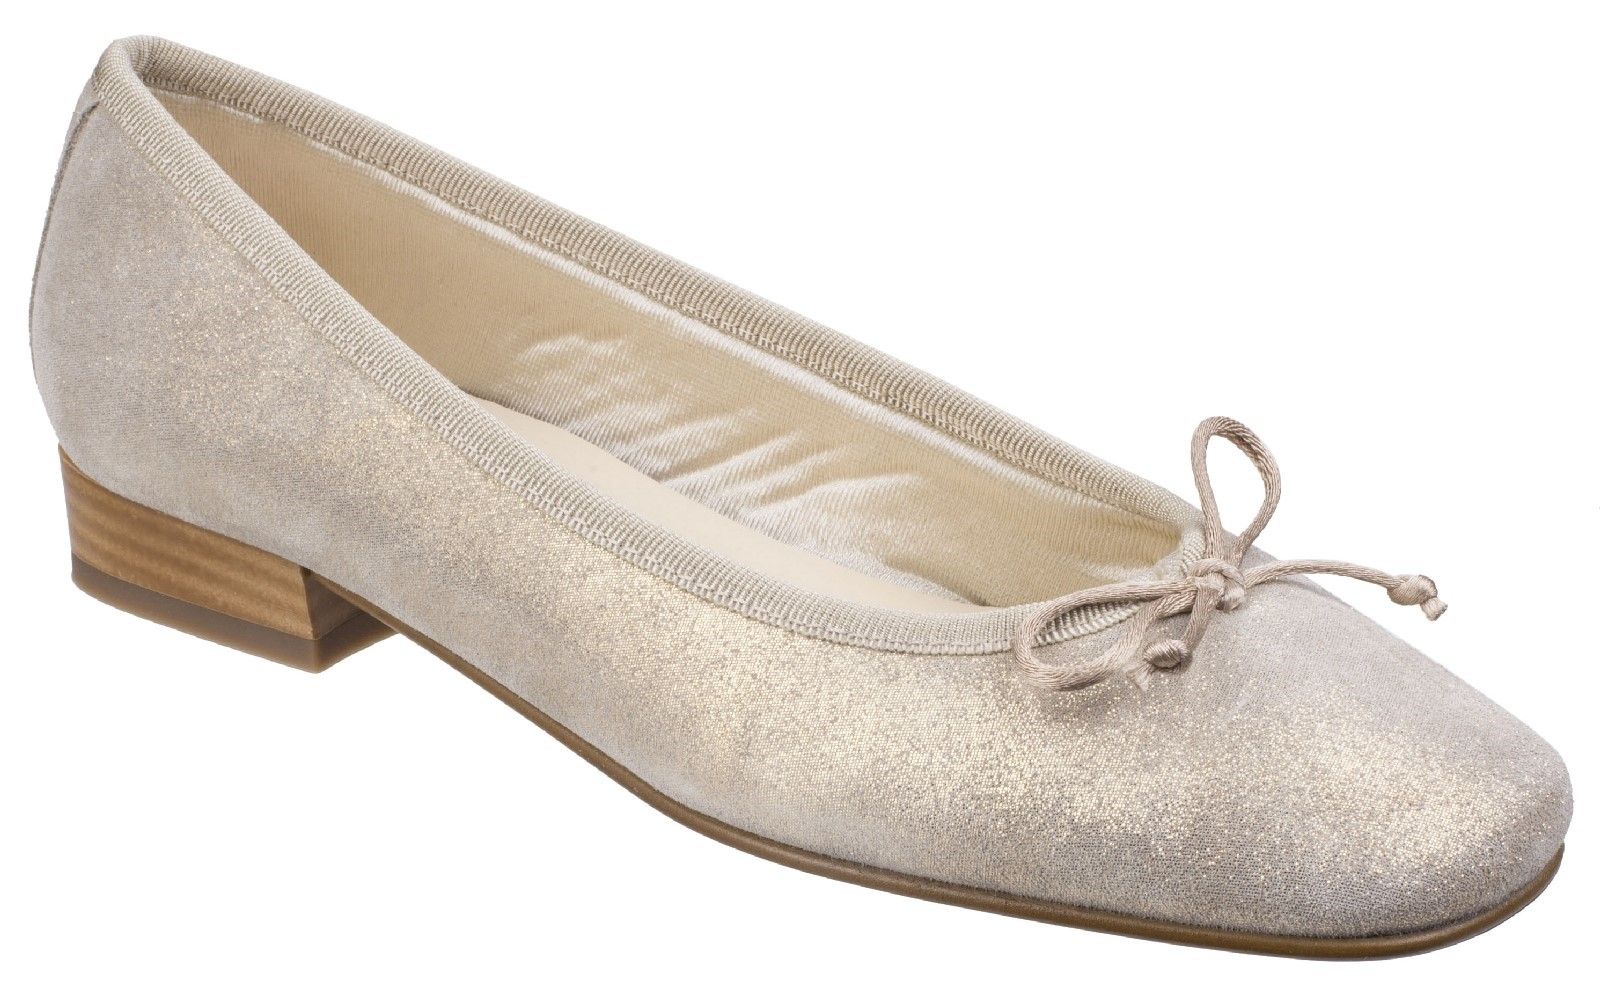 Riva are renowned for their vast collection of ballerinas, original design, sumptuous materials and colour combinations. This ballet court takes you day to night with shimmering grunge skin and defined square toe.Ladies slip on ballerina court shoe. 
Supple suede upper with shimmering grunge print. 
Delicate leather bow. 
Wide opening with textile canvas finish. 
Silky smooth comfort padded textile lining.